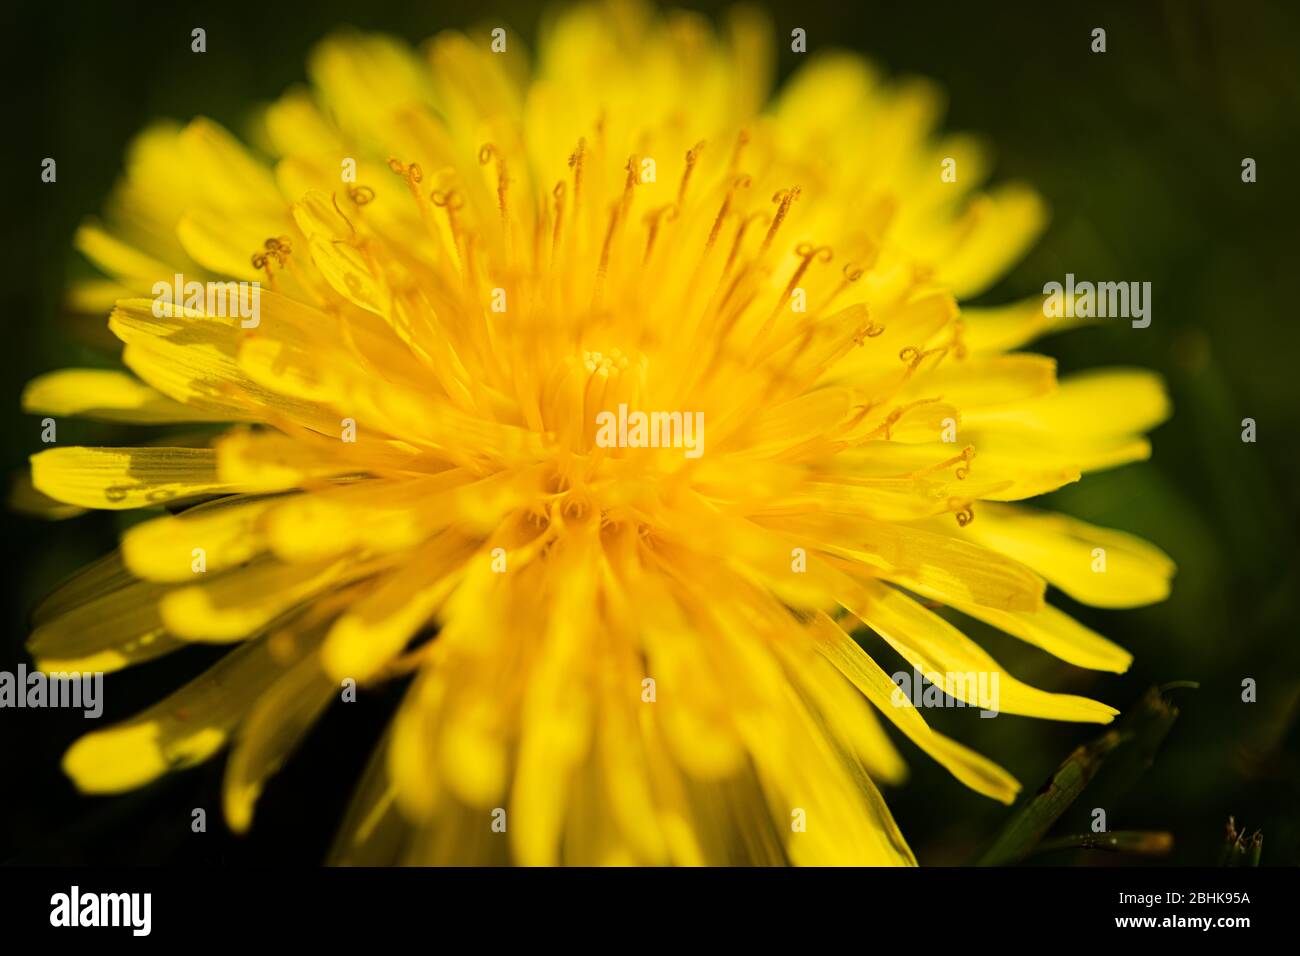 Luton, United Kingdom - April 26th, 2020: Macro Close-Up shot of a Dandelion. You experience the pollen and small fragile texture of a dandelion Stock Photo